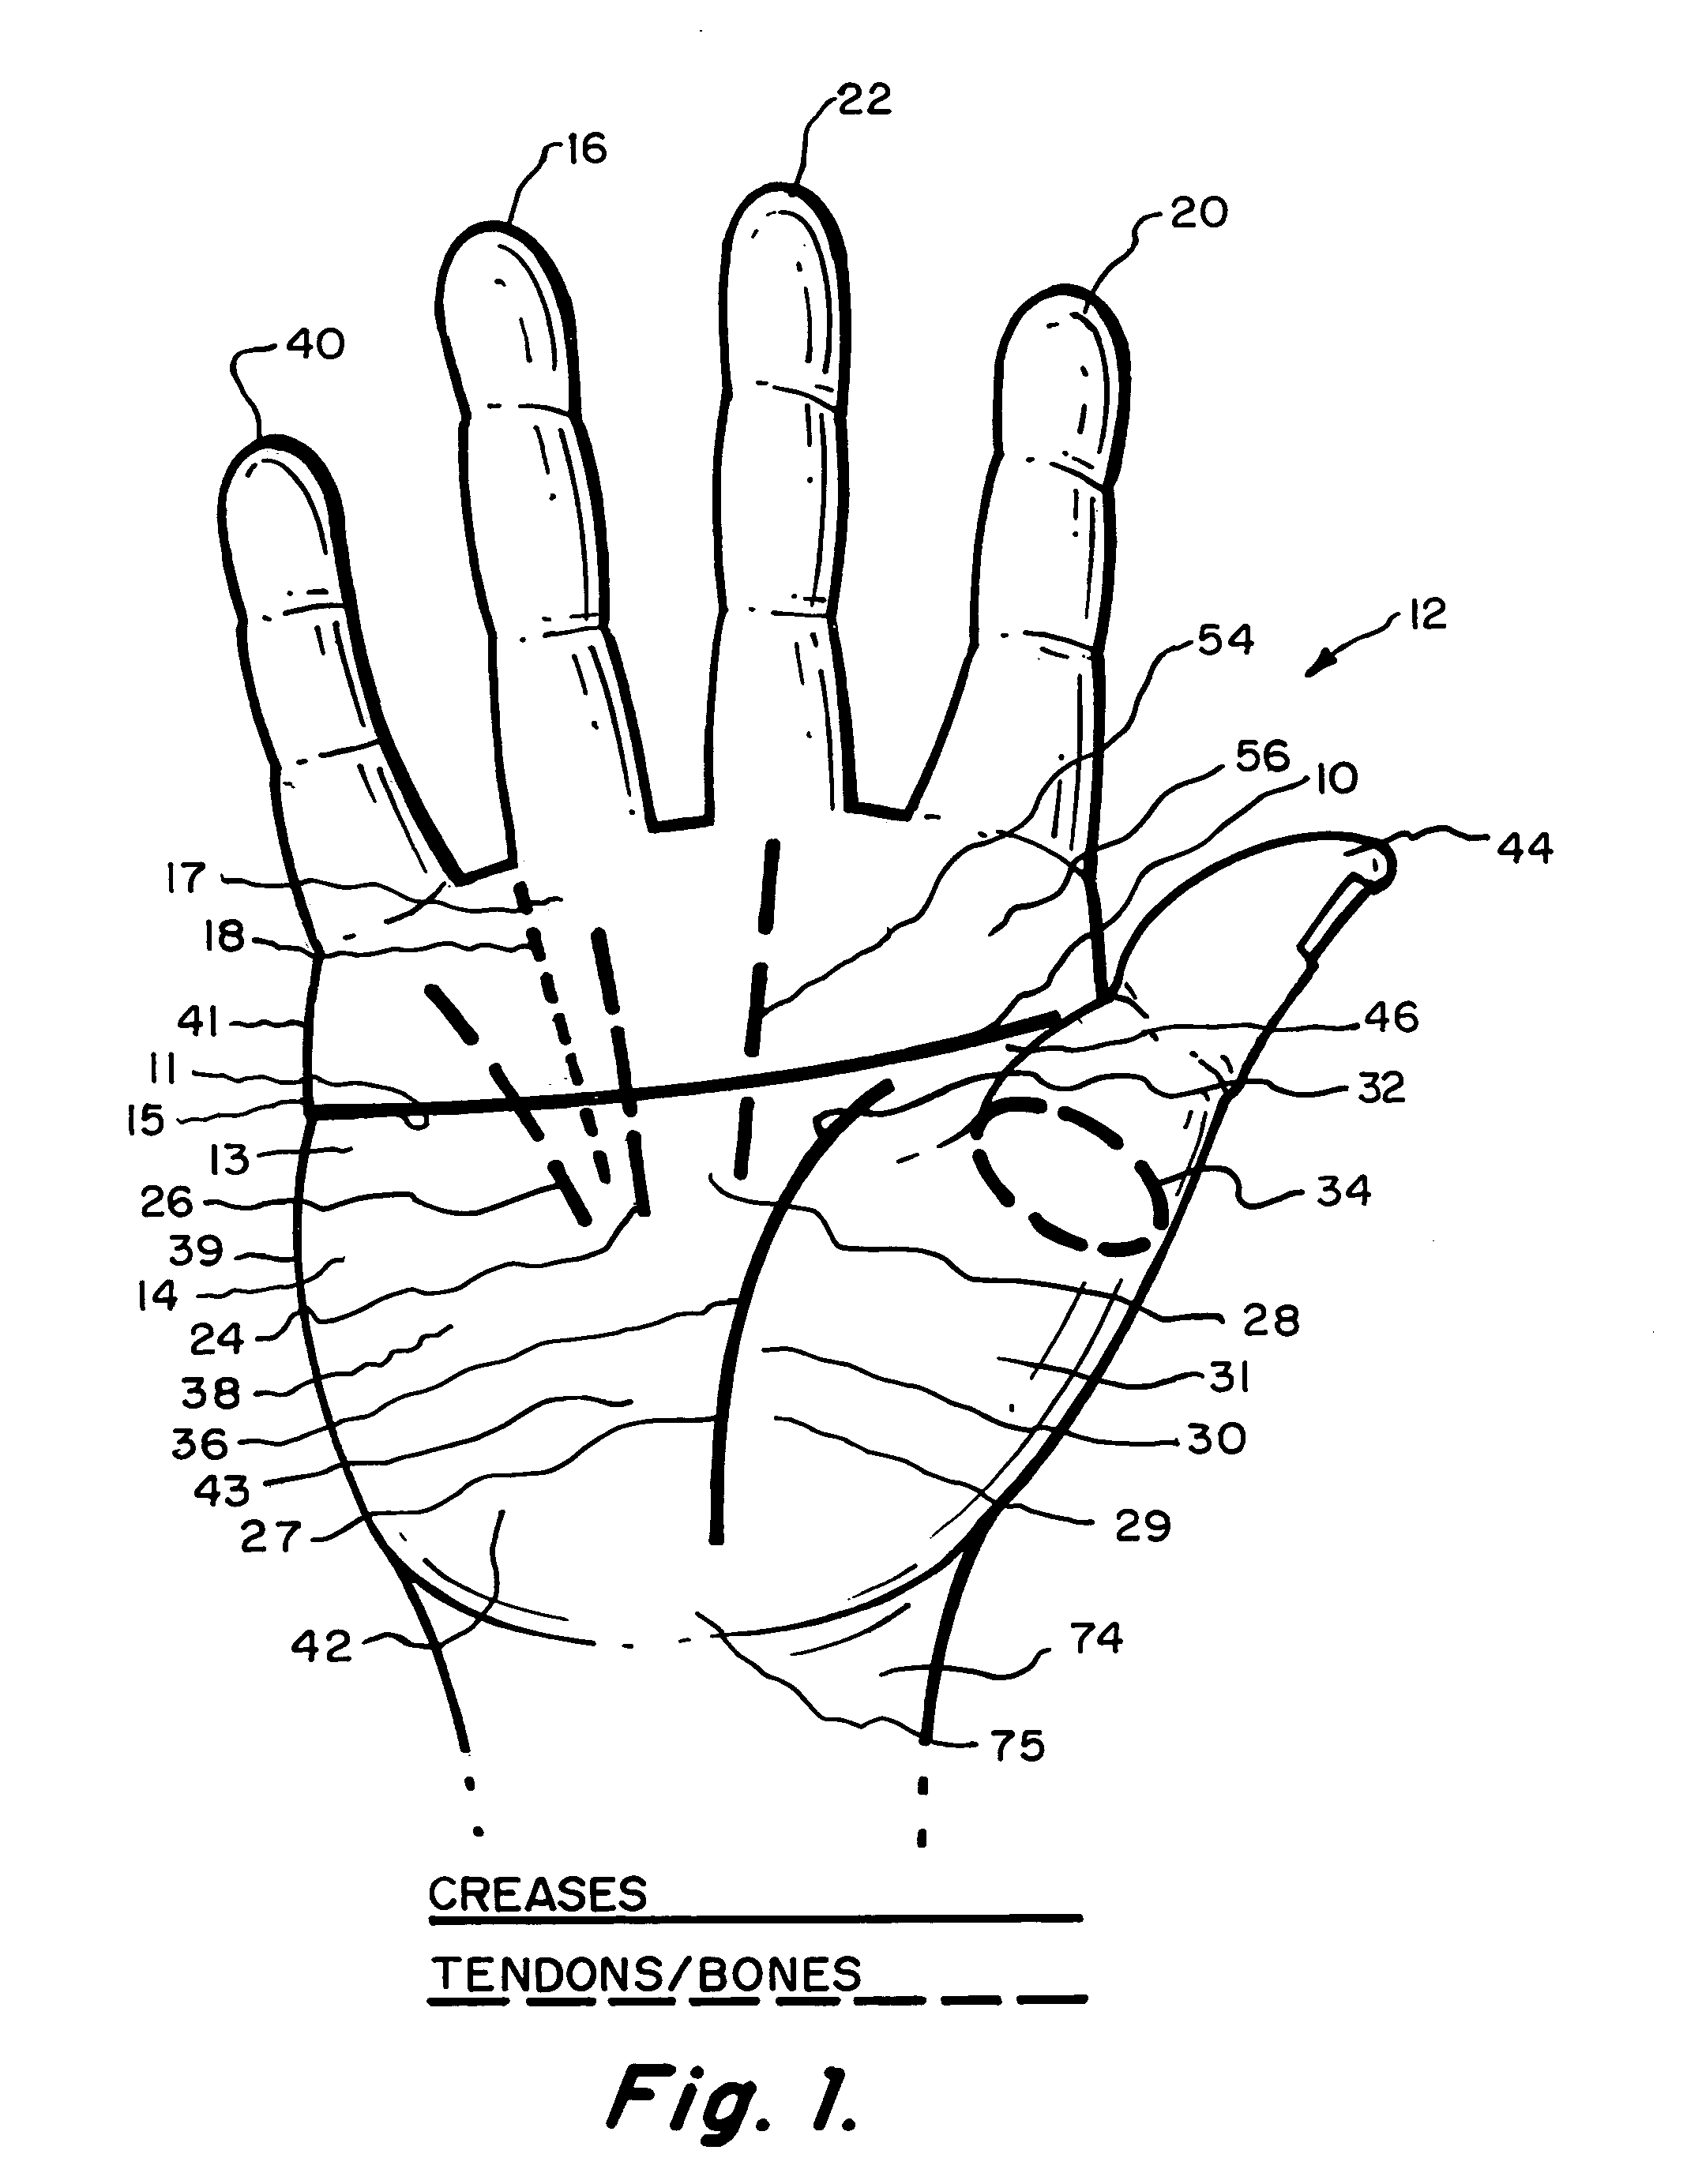 Hand accessory usable with an implement handle